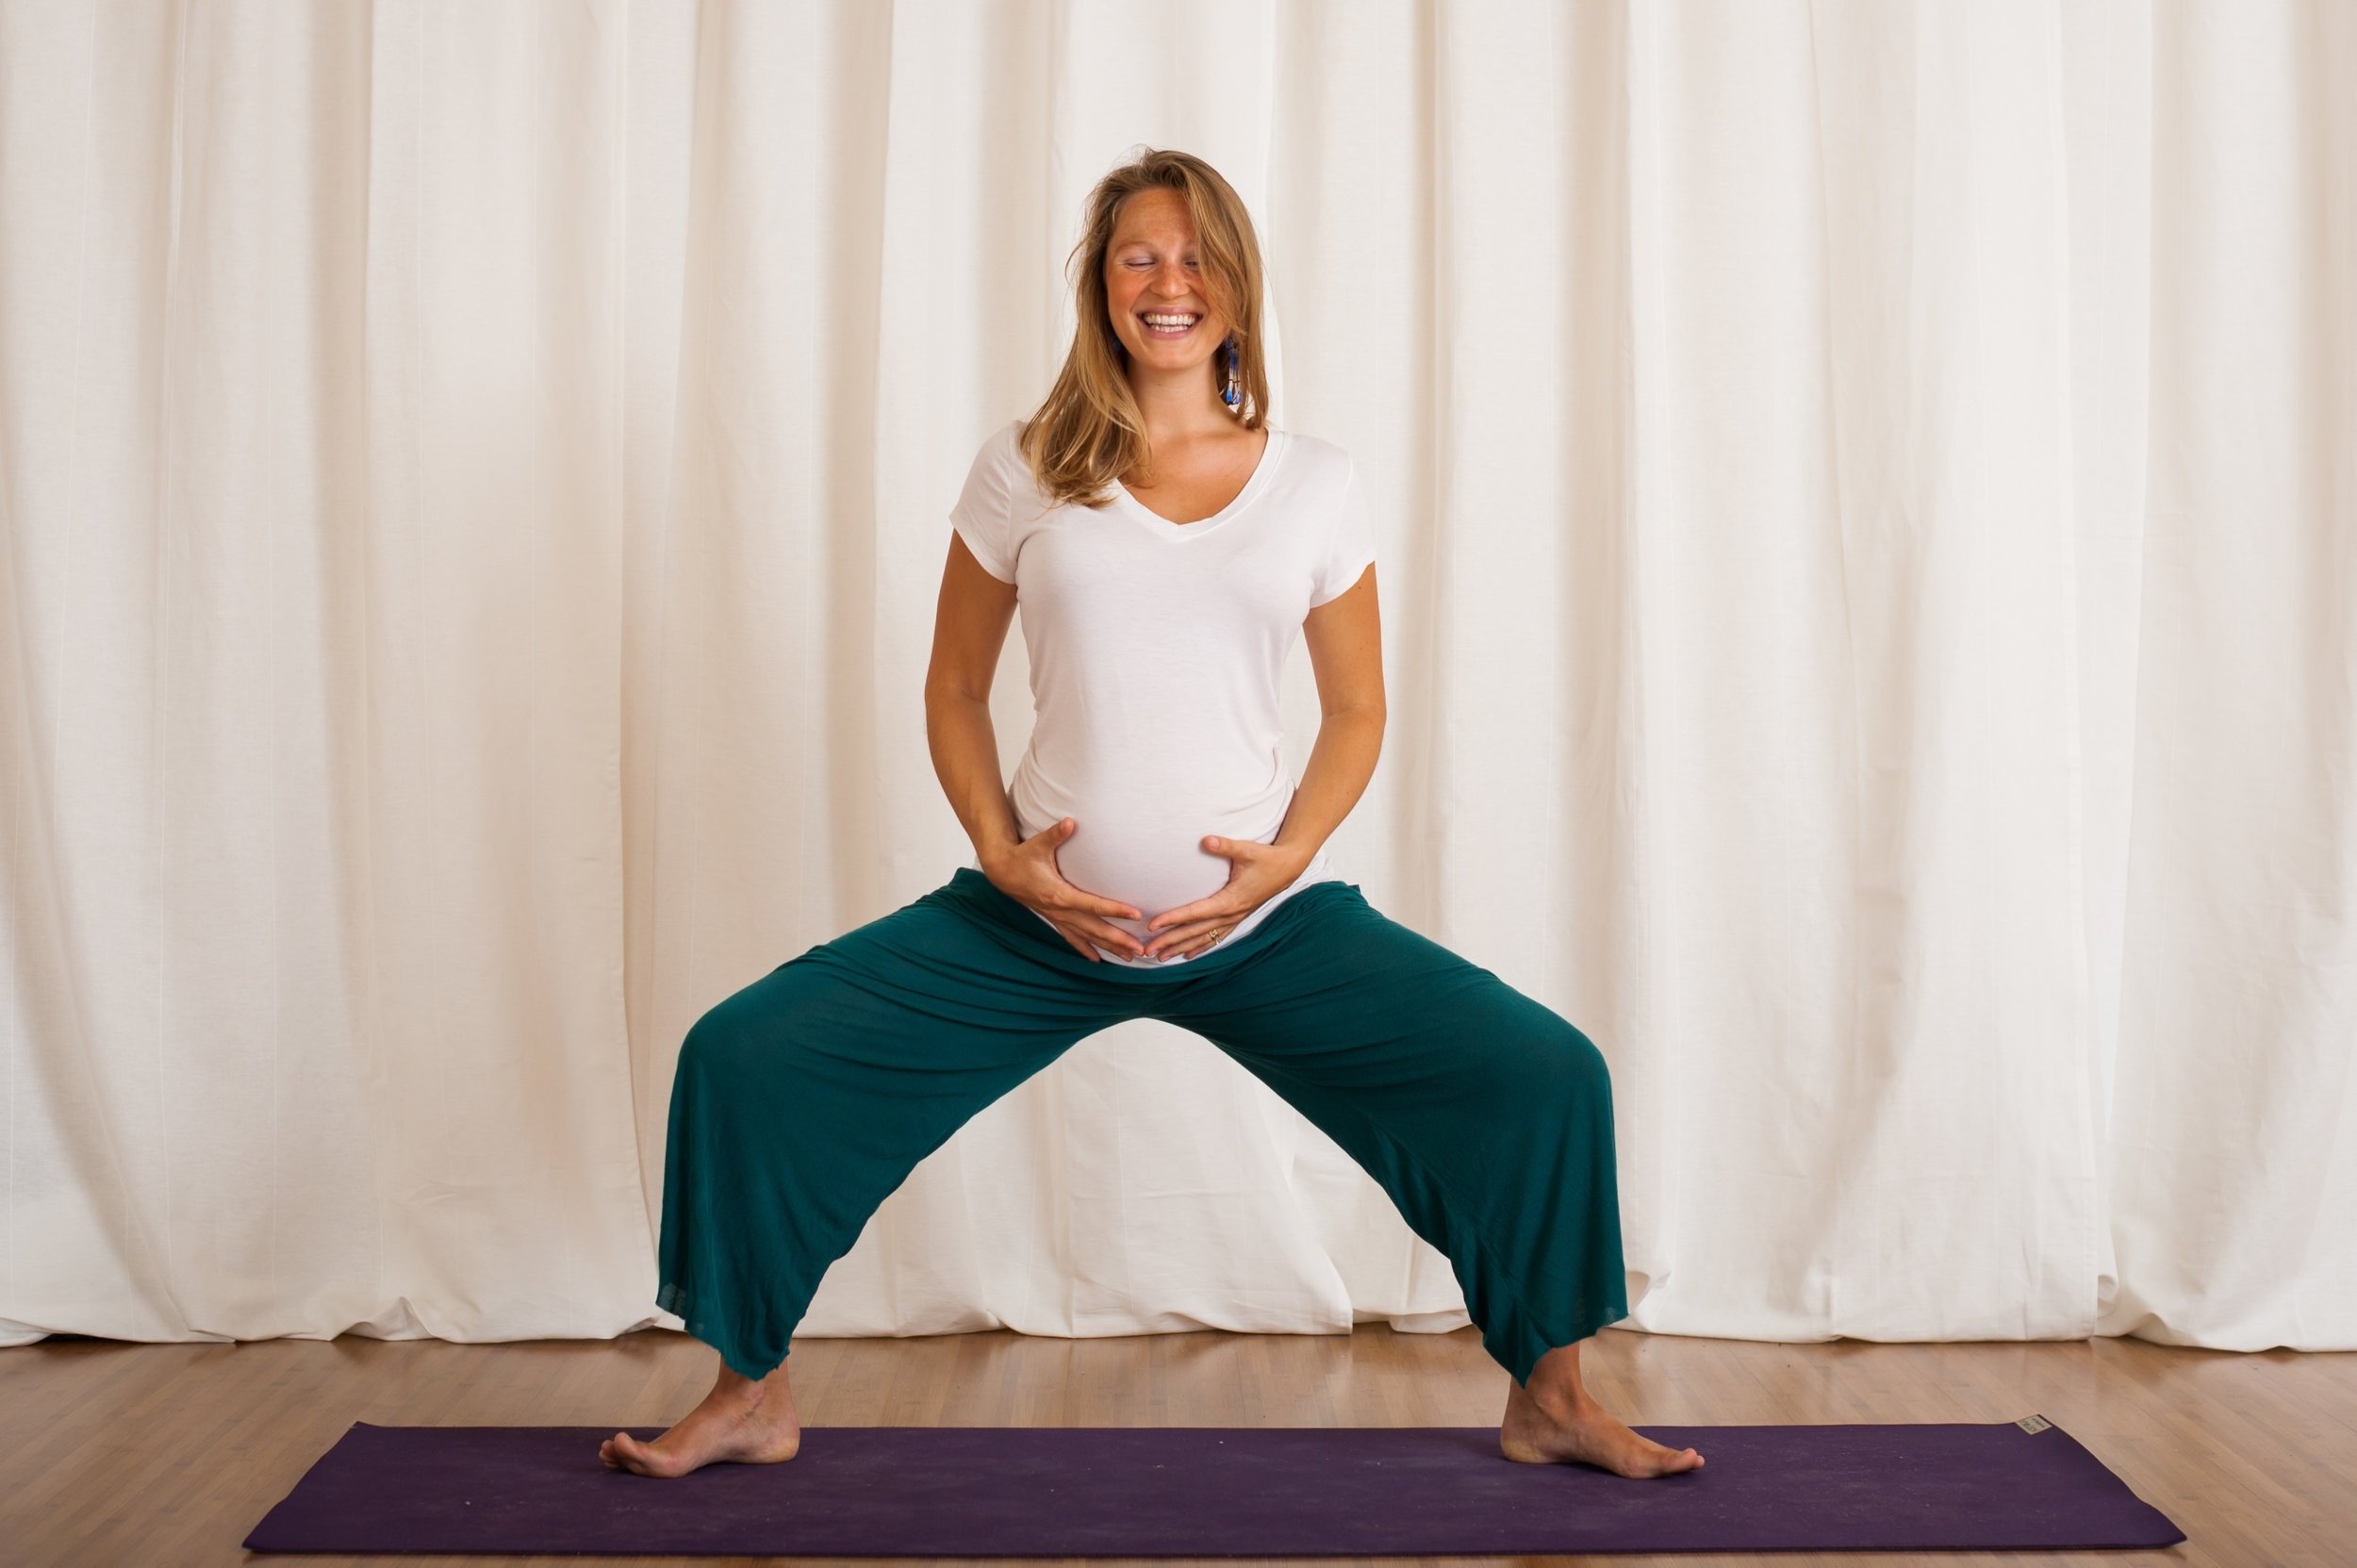   Pre &amp; Post Natal Yoga   Nourish your body and your baby in a supportive community.   Find a class  